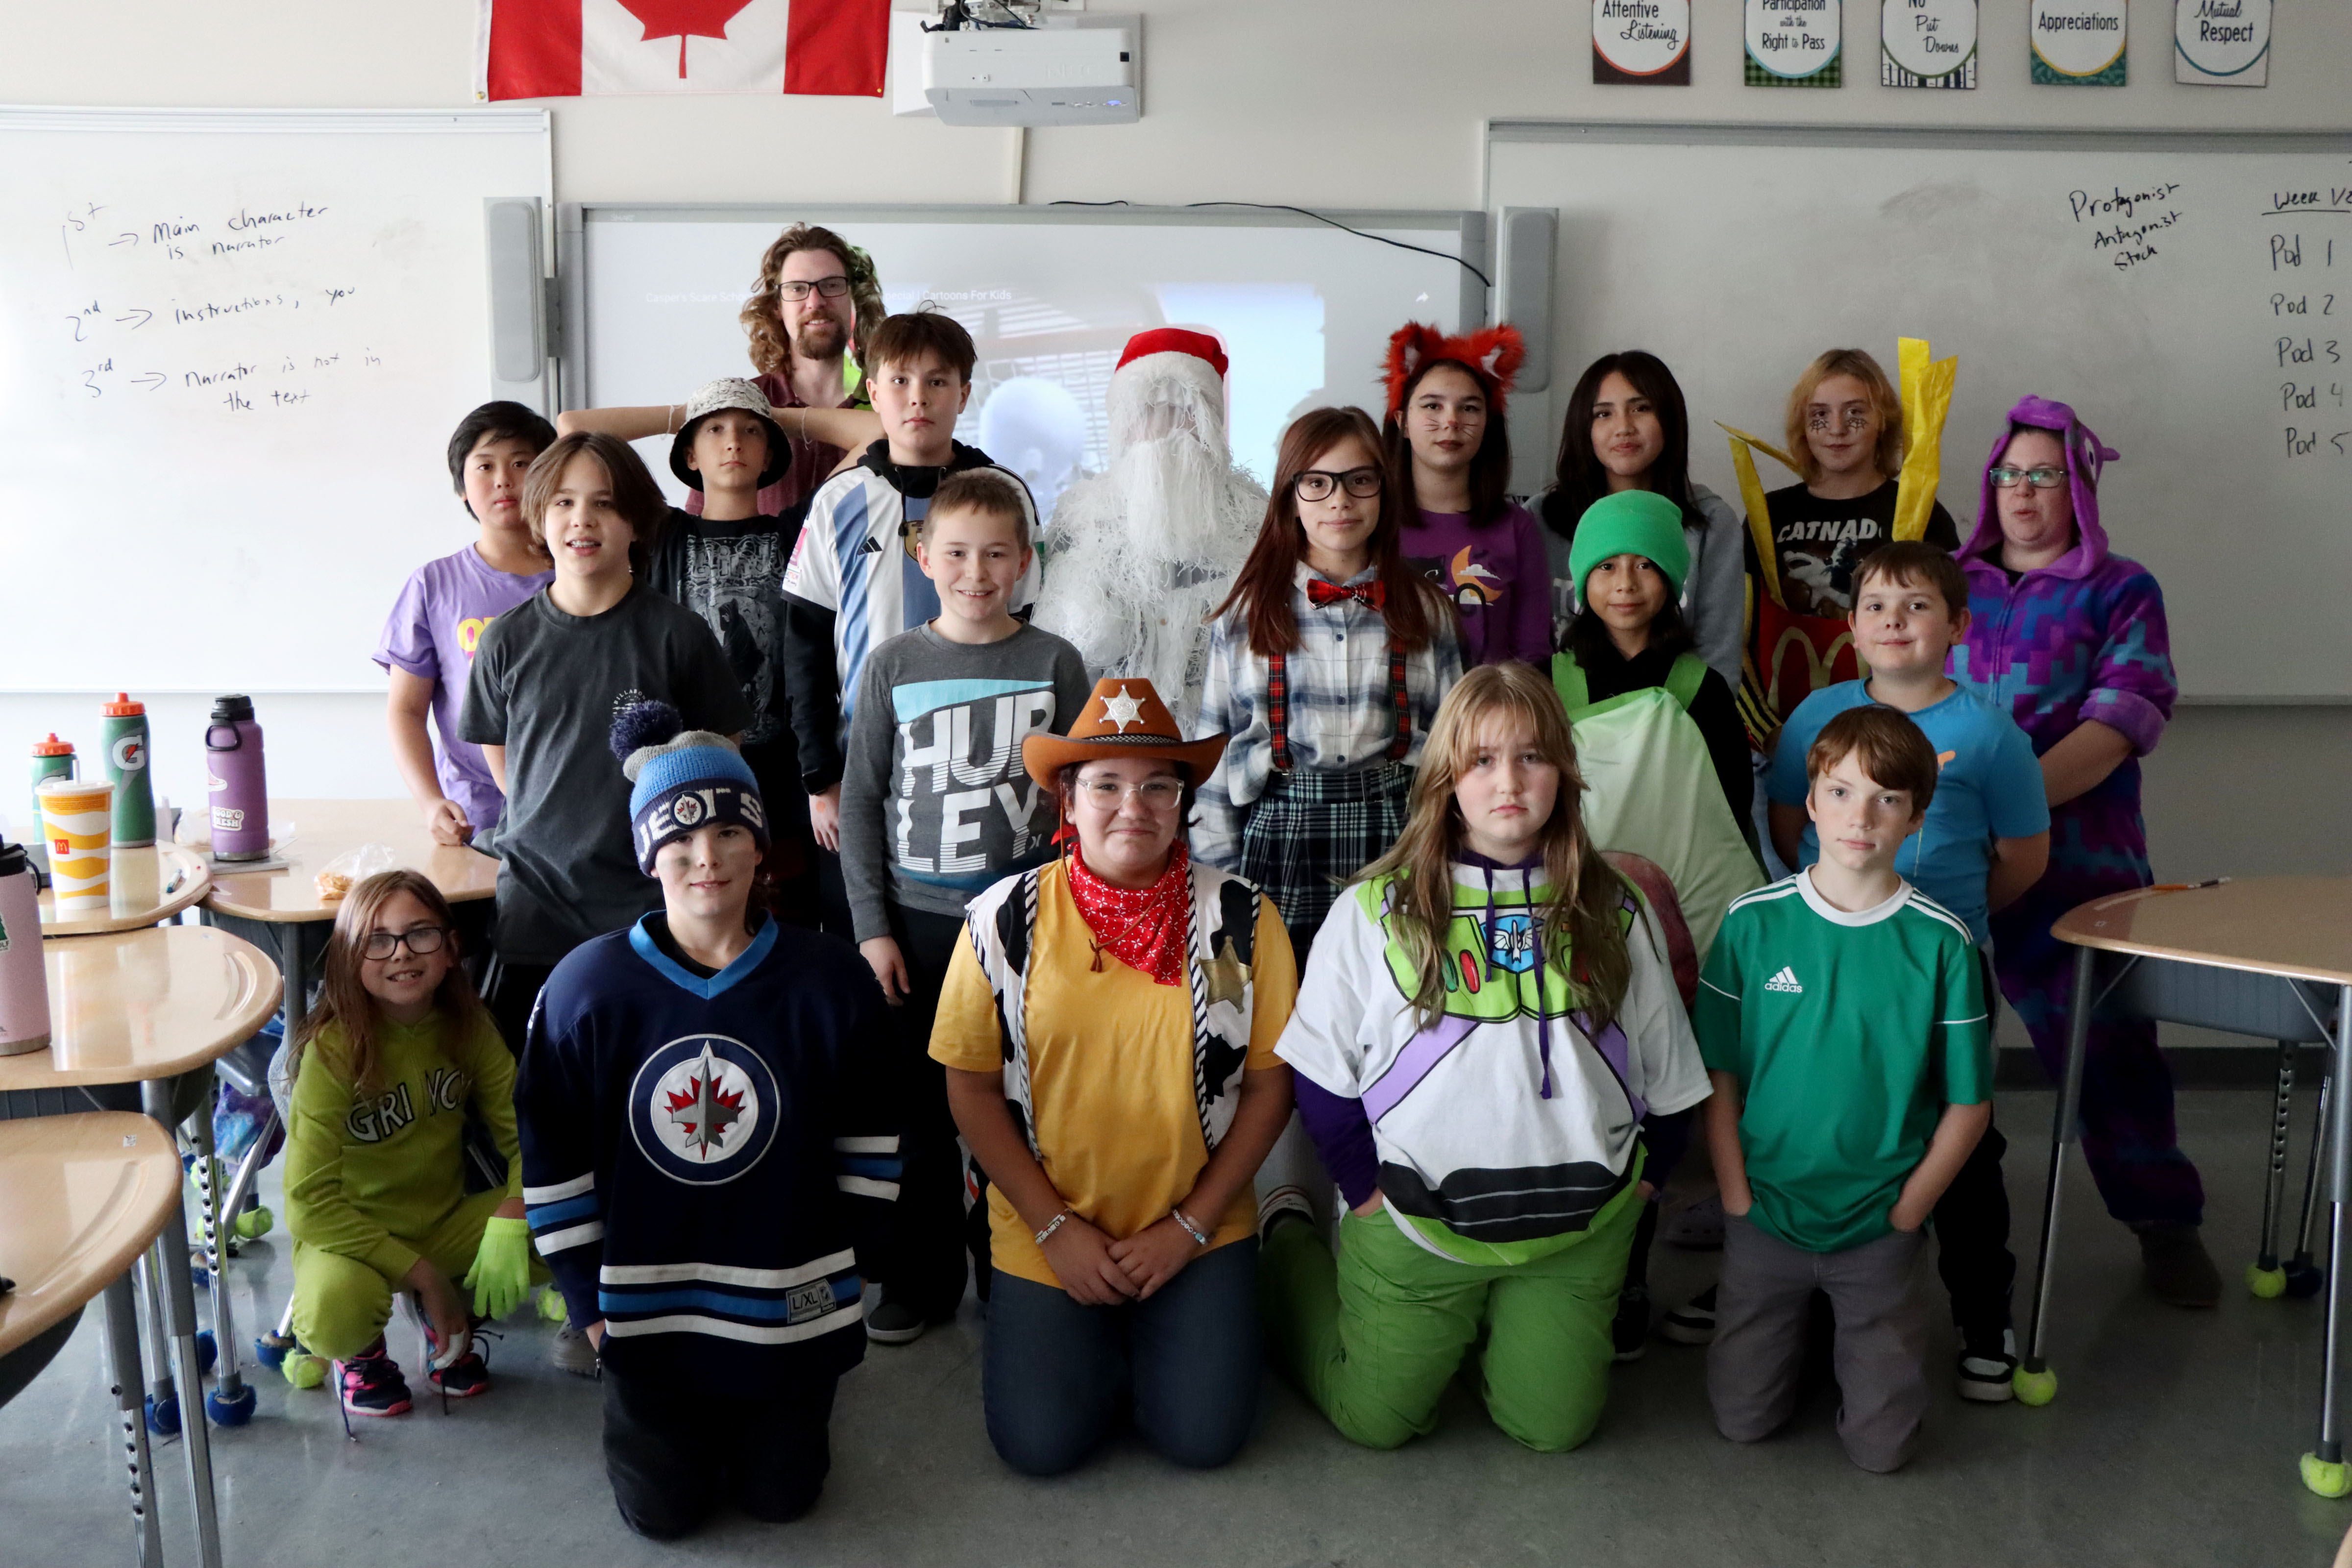 Students in costumes posing for a photo